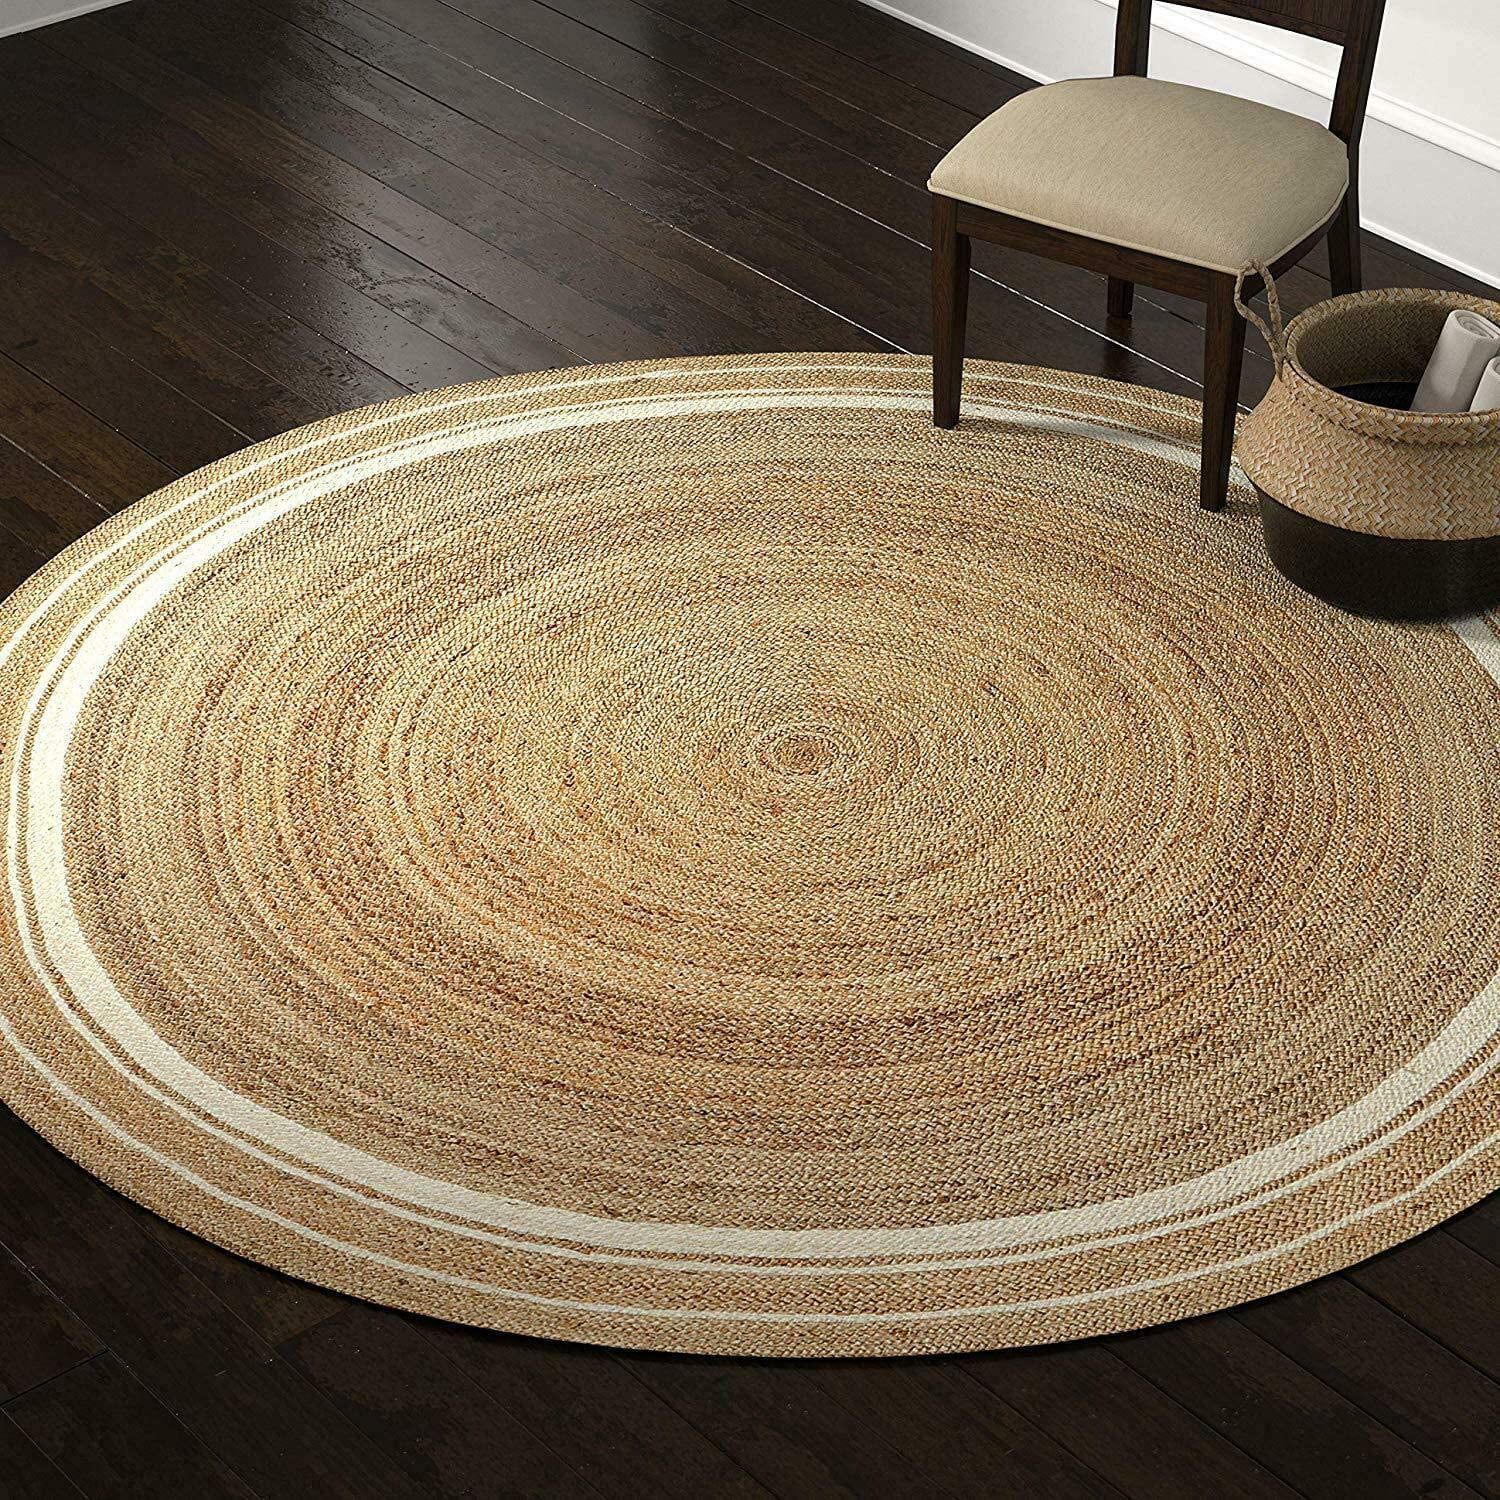 White Border Handmade Hand Woven Boho Braided Jute Area Rug Natural Fibers Round  Rugs For Living Room, Kitchen, Indoor & Outdoor Carpet  12” Feet (144 Inch)  – Walmart In Border Round Rugs (View 6 of 15)